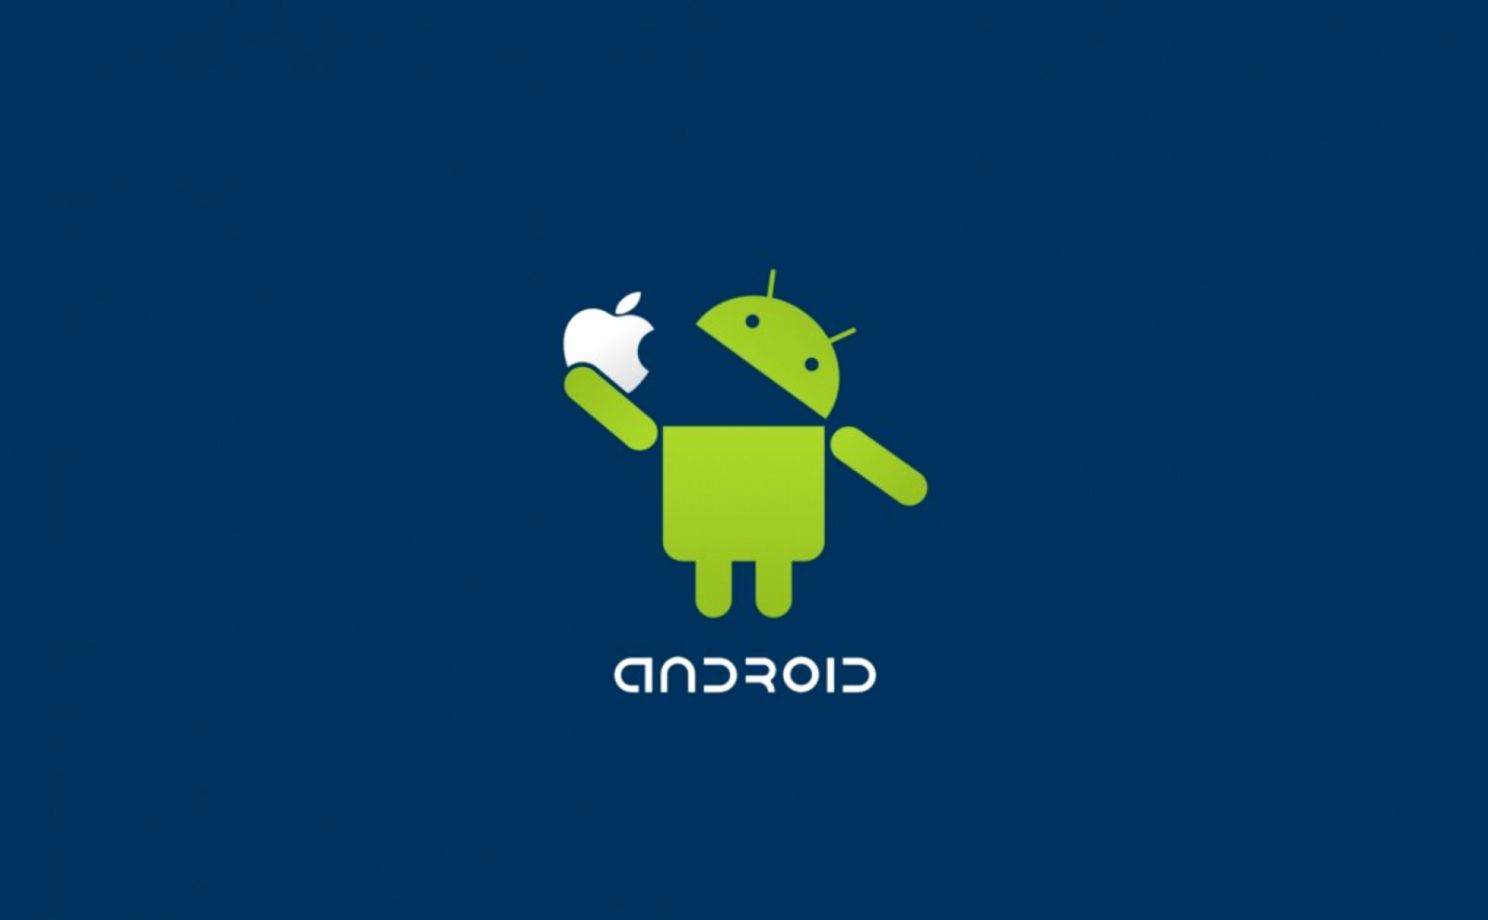 Funny Android Wallpaper Mobile Styles - Android Vs Apple - 1488x920  Wallpaper 